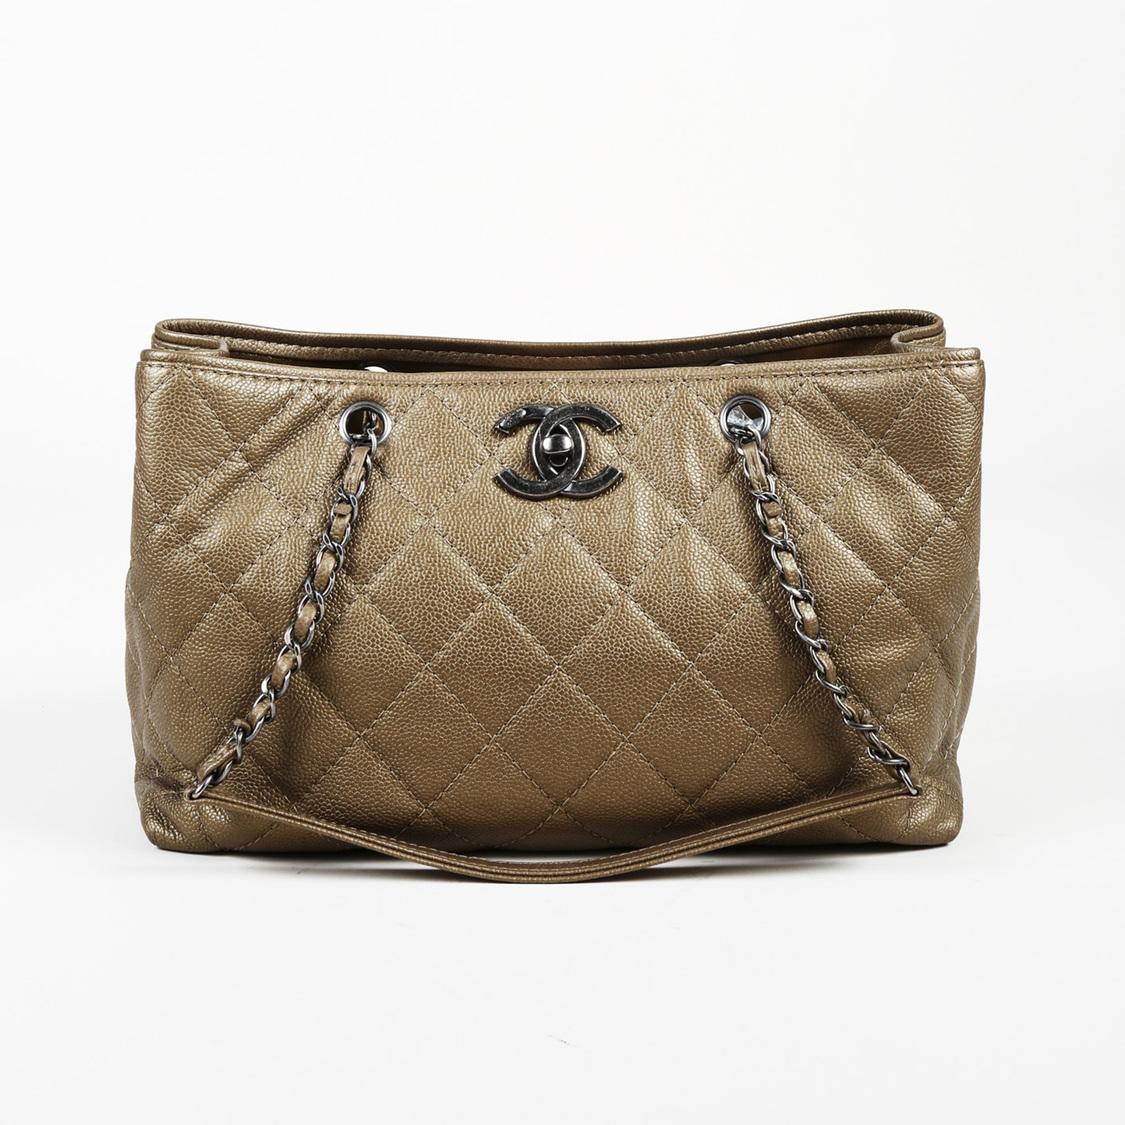 Chanel Cc Shopper Quilted Caviar Leather Tote Bag in Metallic - Lyst